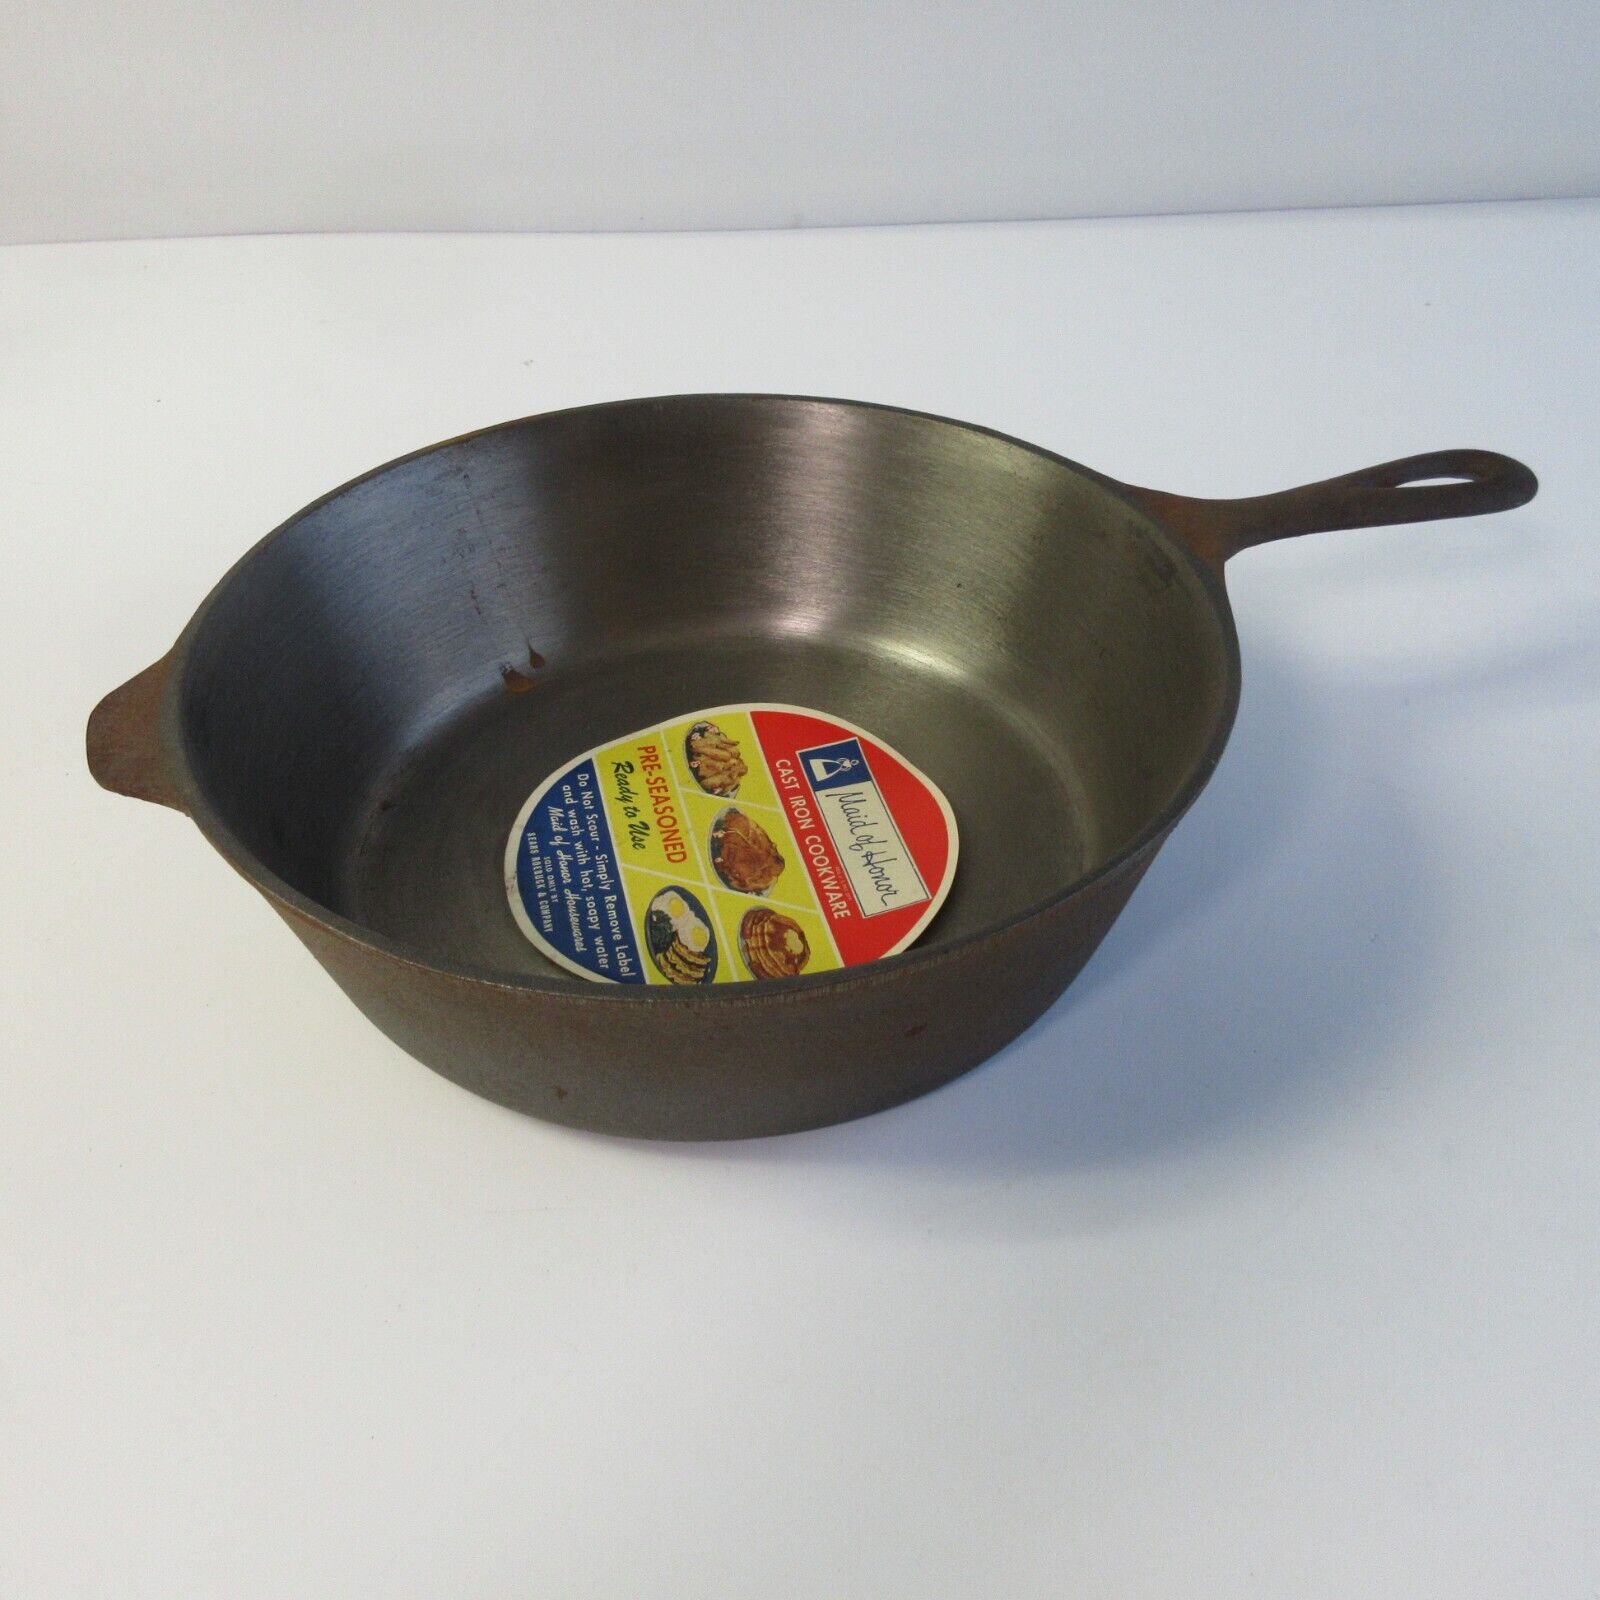 VTG Rare Maid Of Honor Deep Skillet/Chicken Fryer? Cast Iron #8 never used